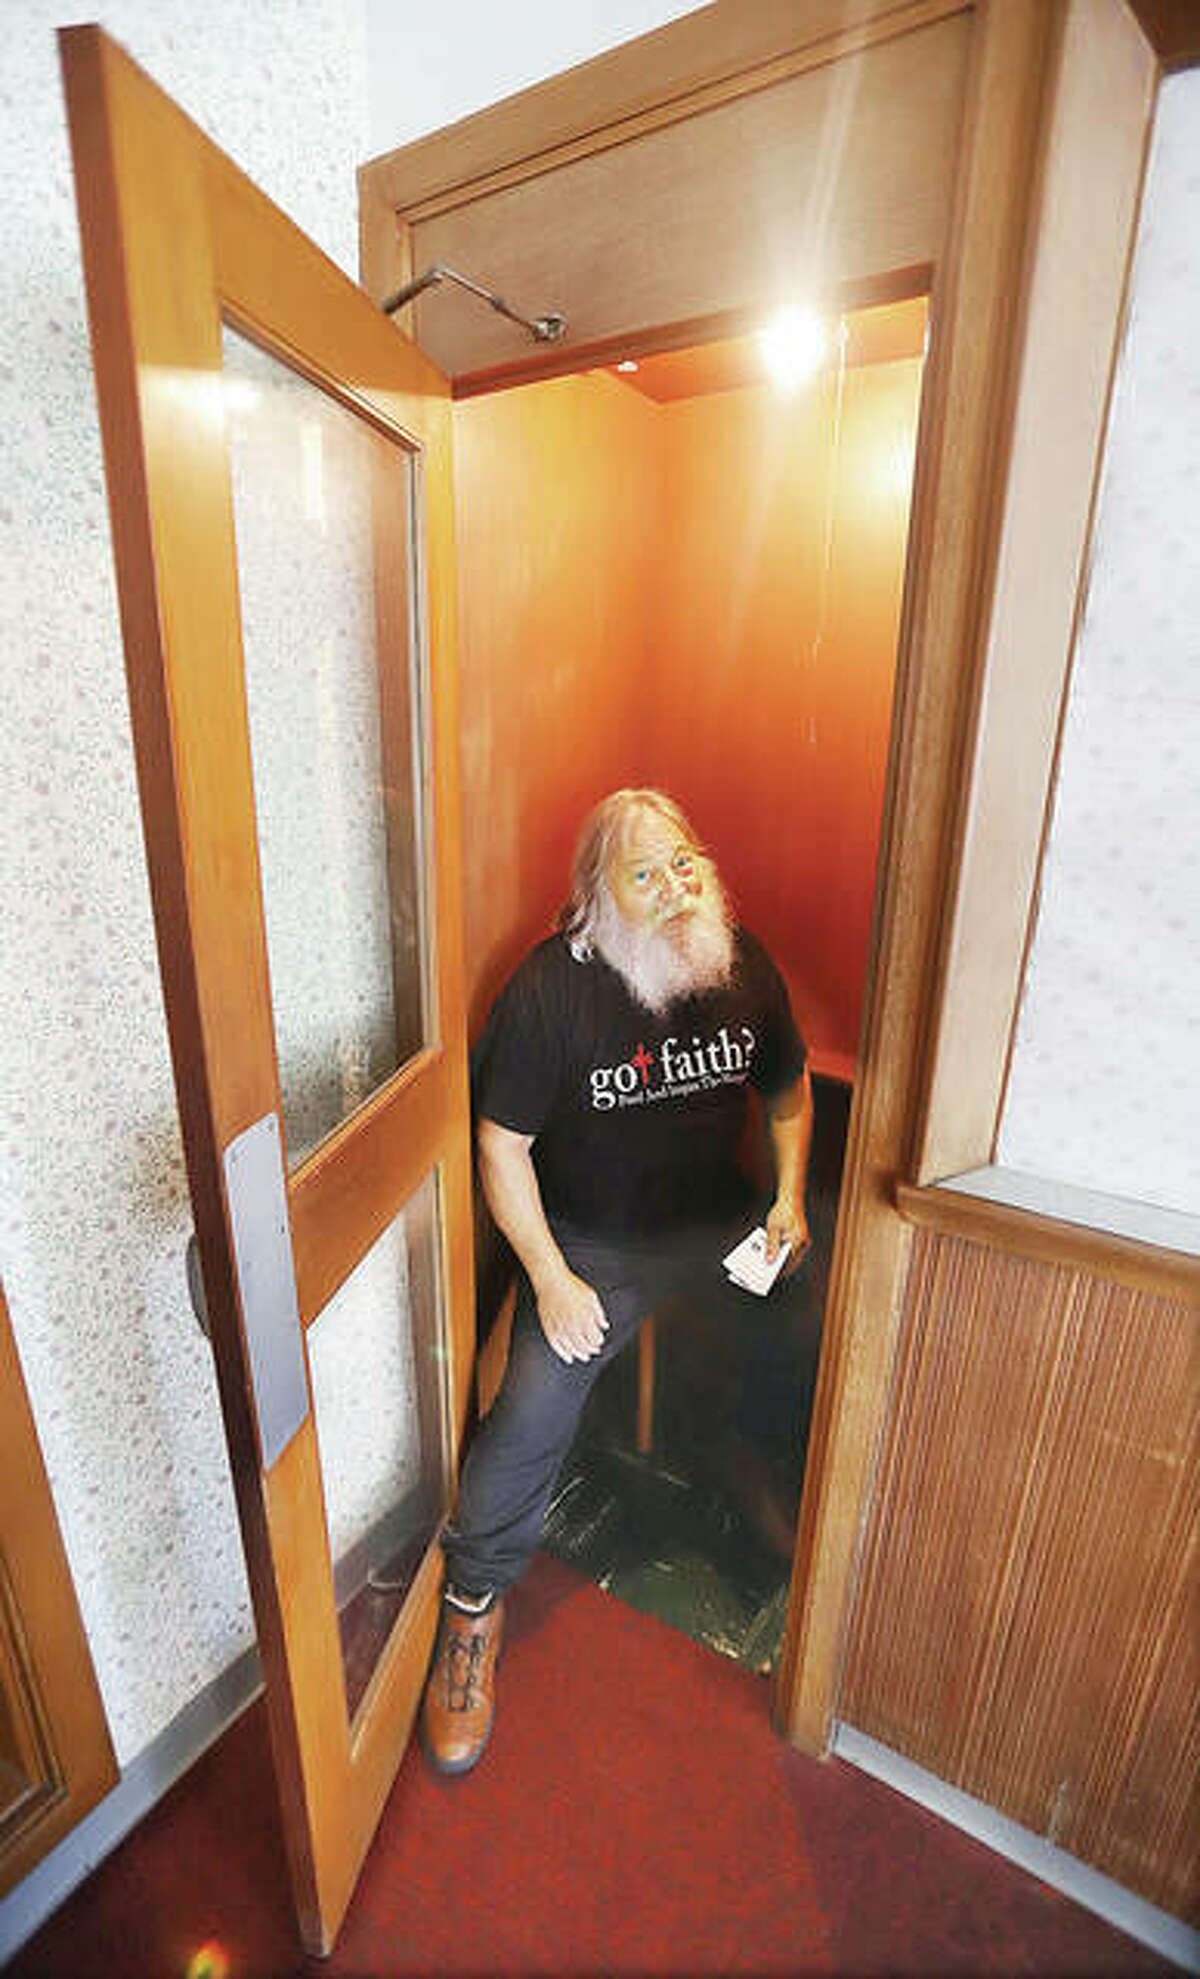 Steve Pegram sits in the built-in phone booth in the corner of lobby of a building donated last week to his ministry. Pegram said people remember the phone booth and ask him if it’s still there; it is, but the phone is gone.